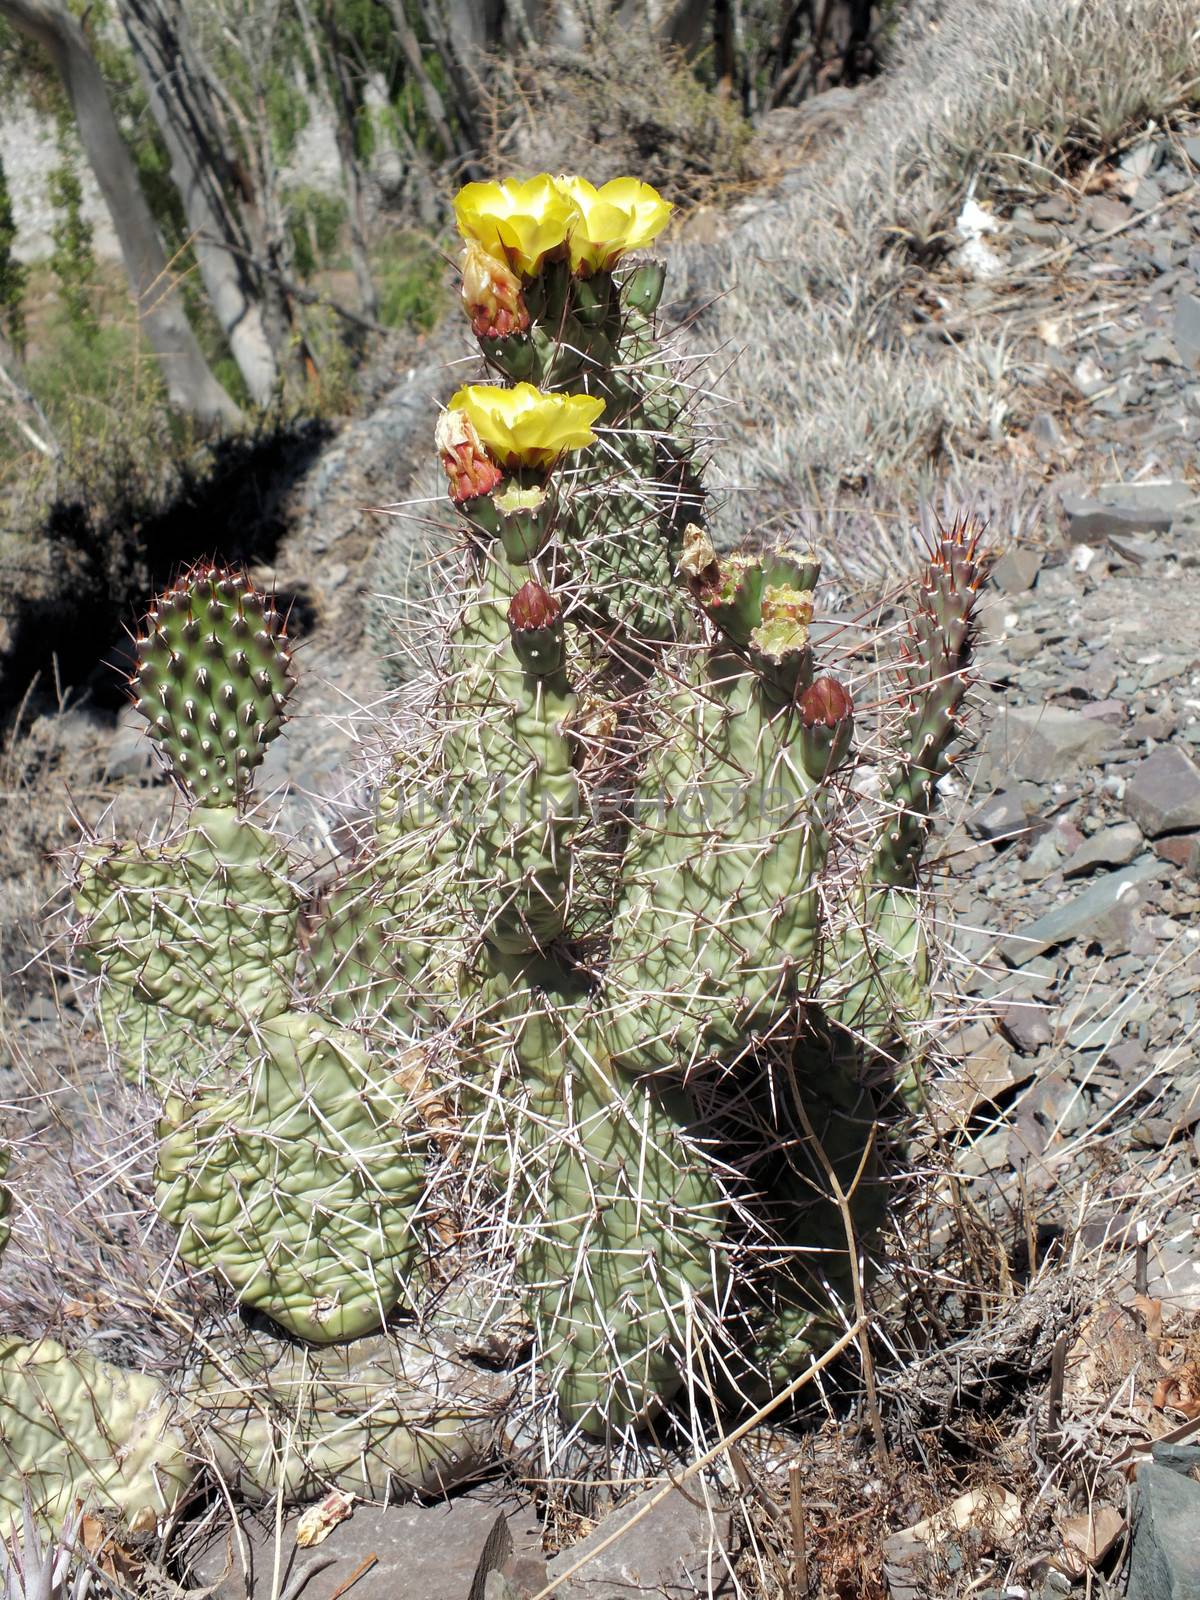 The Jointed Prickly-pear occurs naturally in Argentina, Paraguay and Uruguay and is considered an invasive species in Africa and Australia.